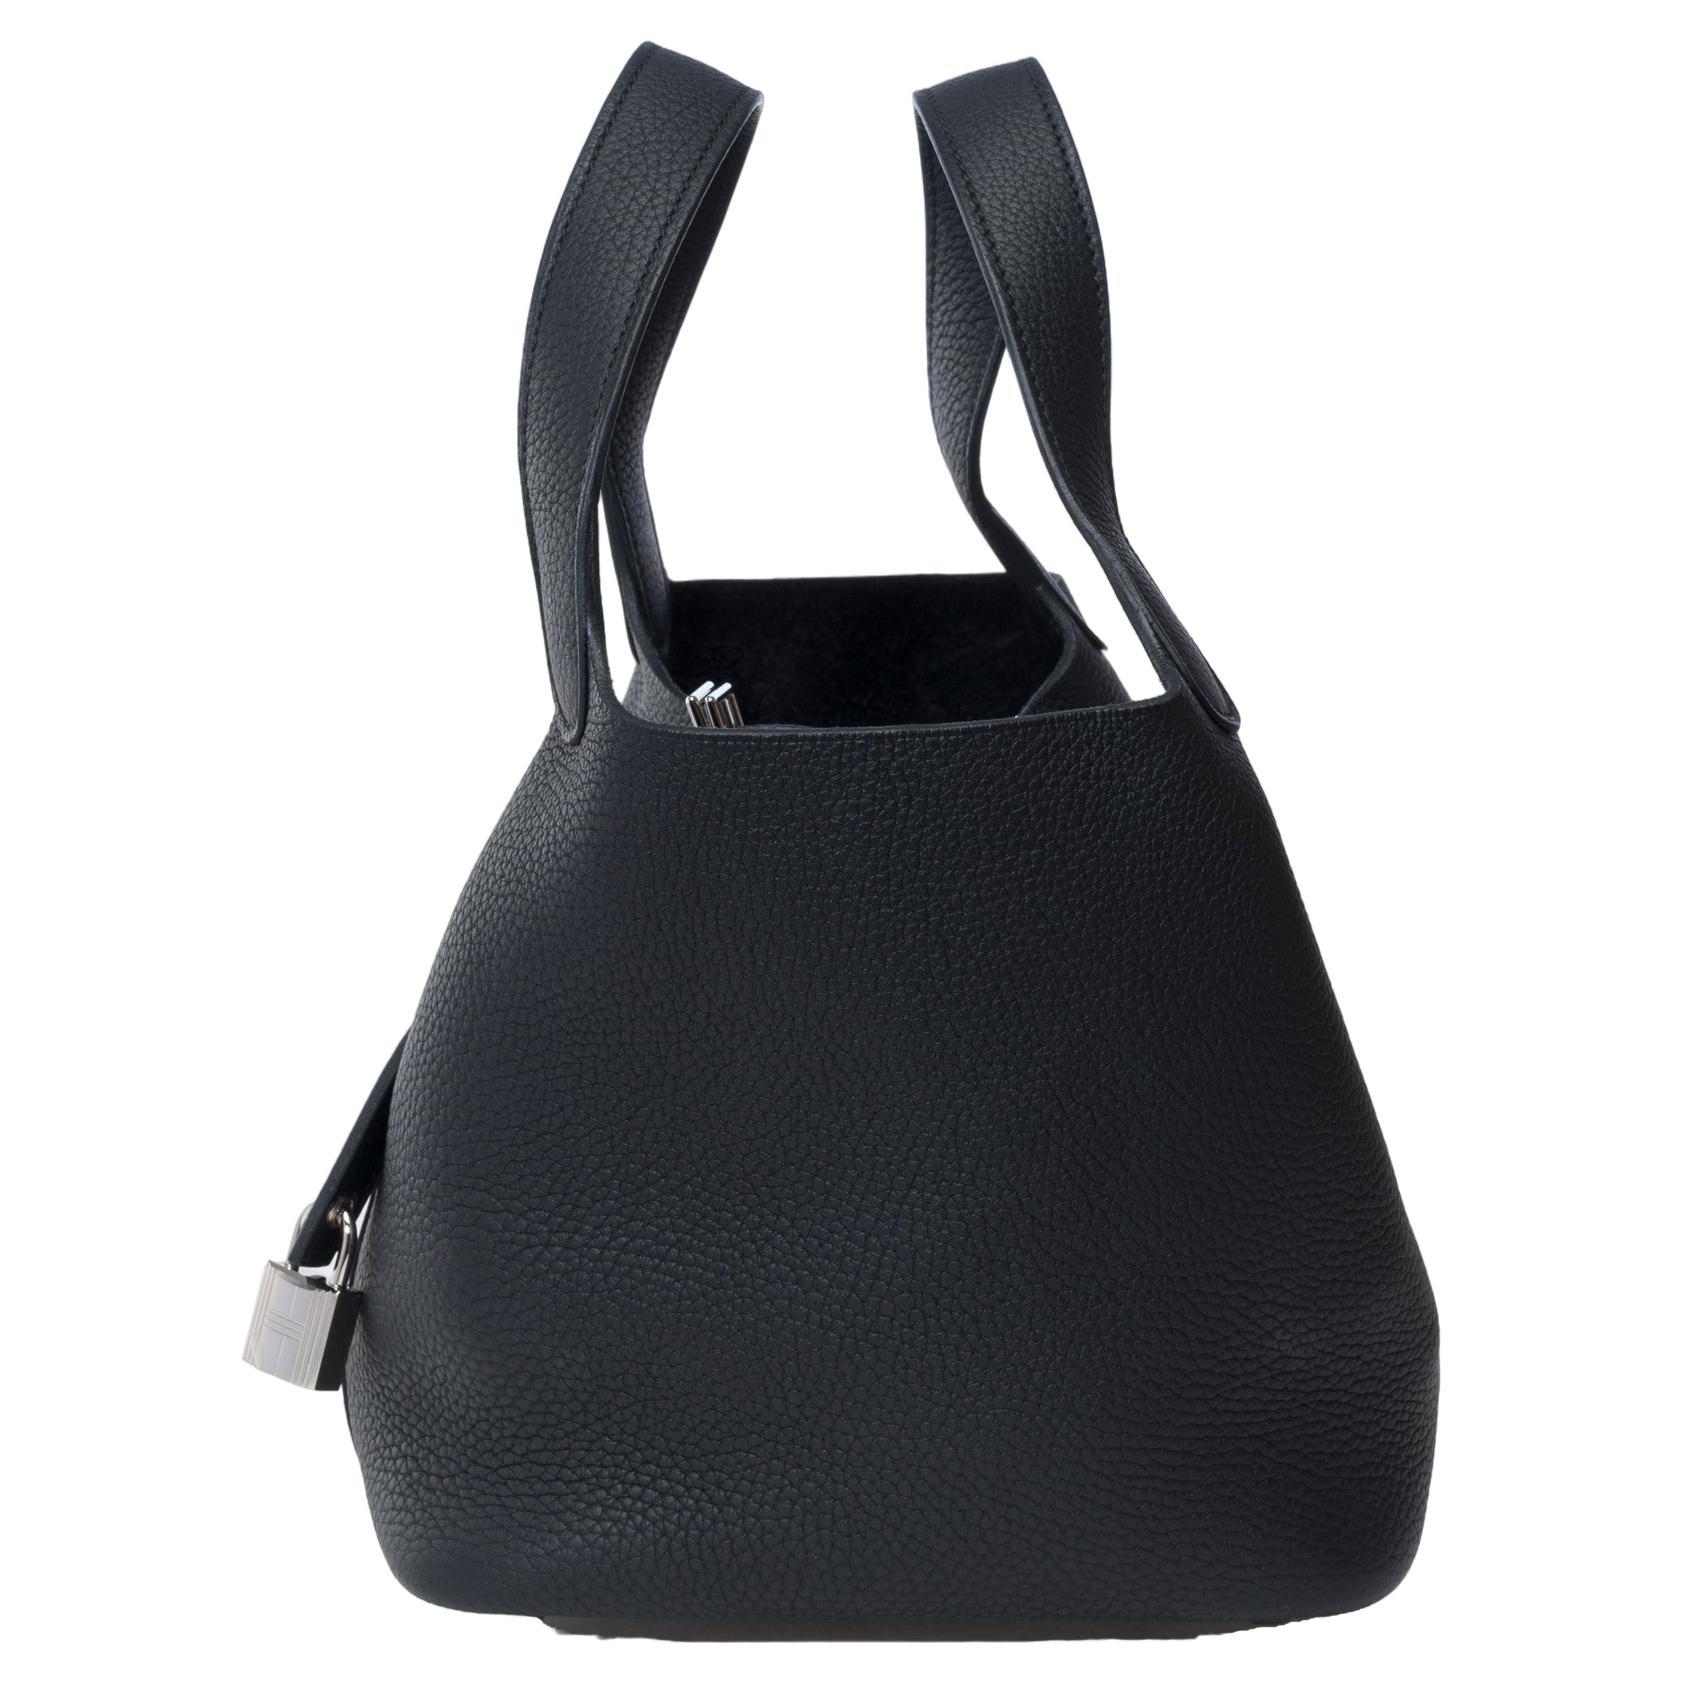 Lovely​ ​Hermes​ ​Picotin​ Lock ​18​ ​in​ ​Black​ ​Taurillon​ ​Clémence​ ​leather,​ silver ​metal​ ​hardware,​ ​double​ ​handle​ ​in​ ​black​ ​leather​ ​allowing​ ​a​ ​hand​ ​carry

Closure​ ​by​ ​leather​ ​tab
black​ ​suede​ ​interior
Signature:​